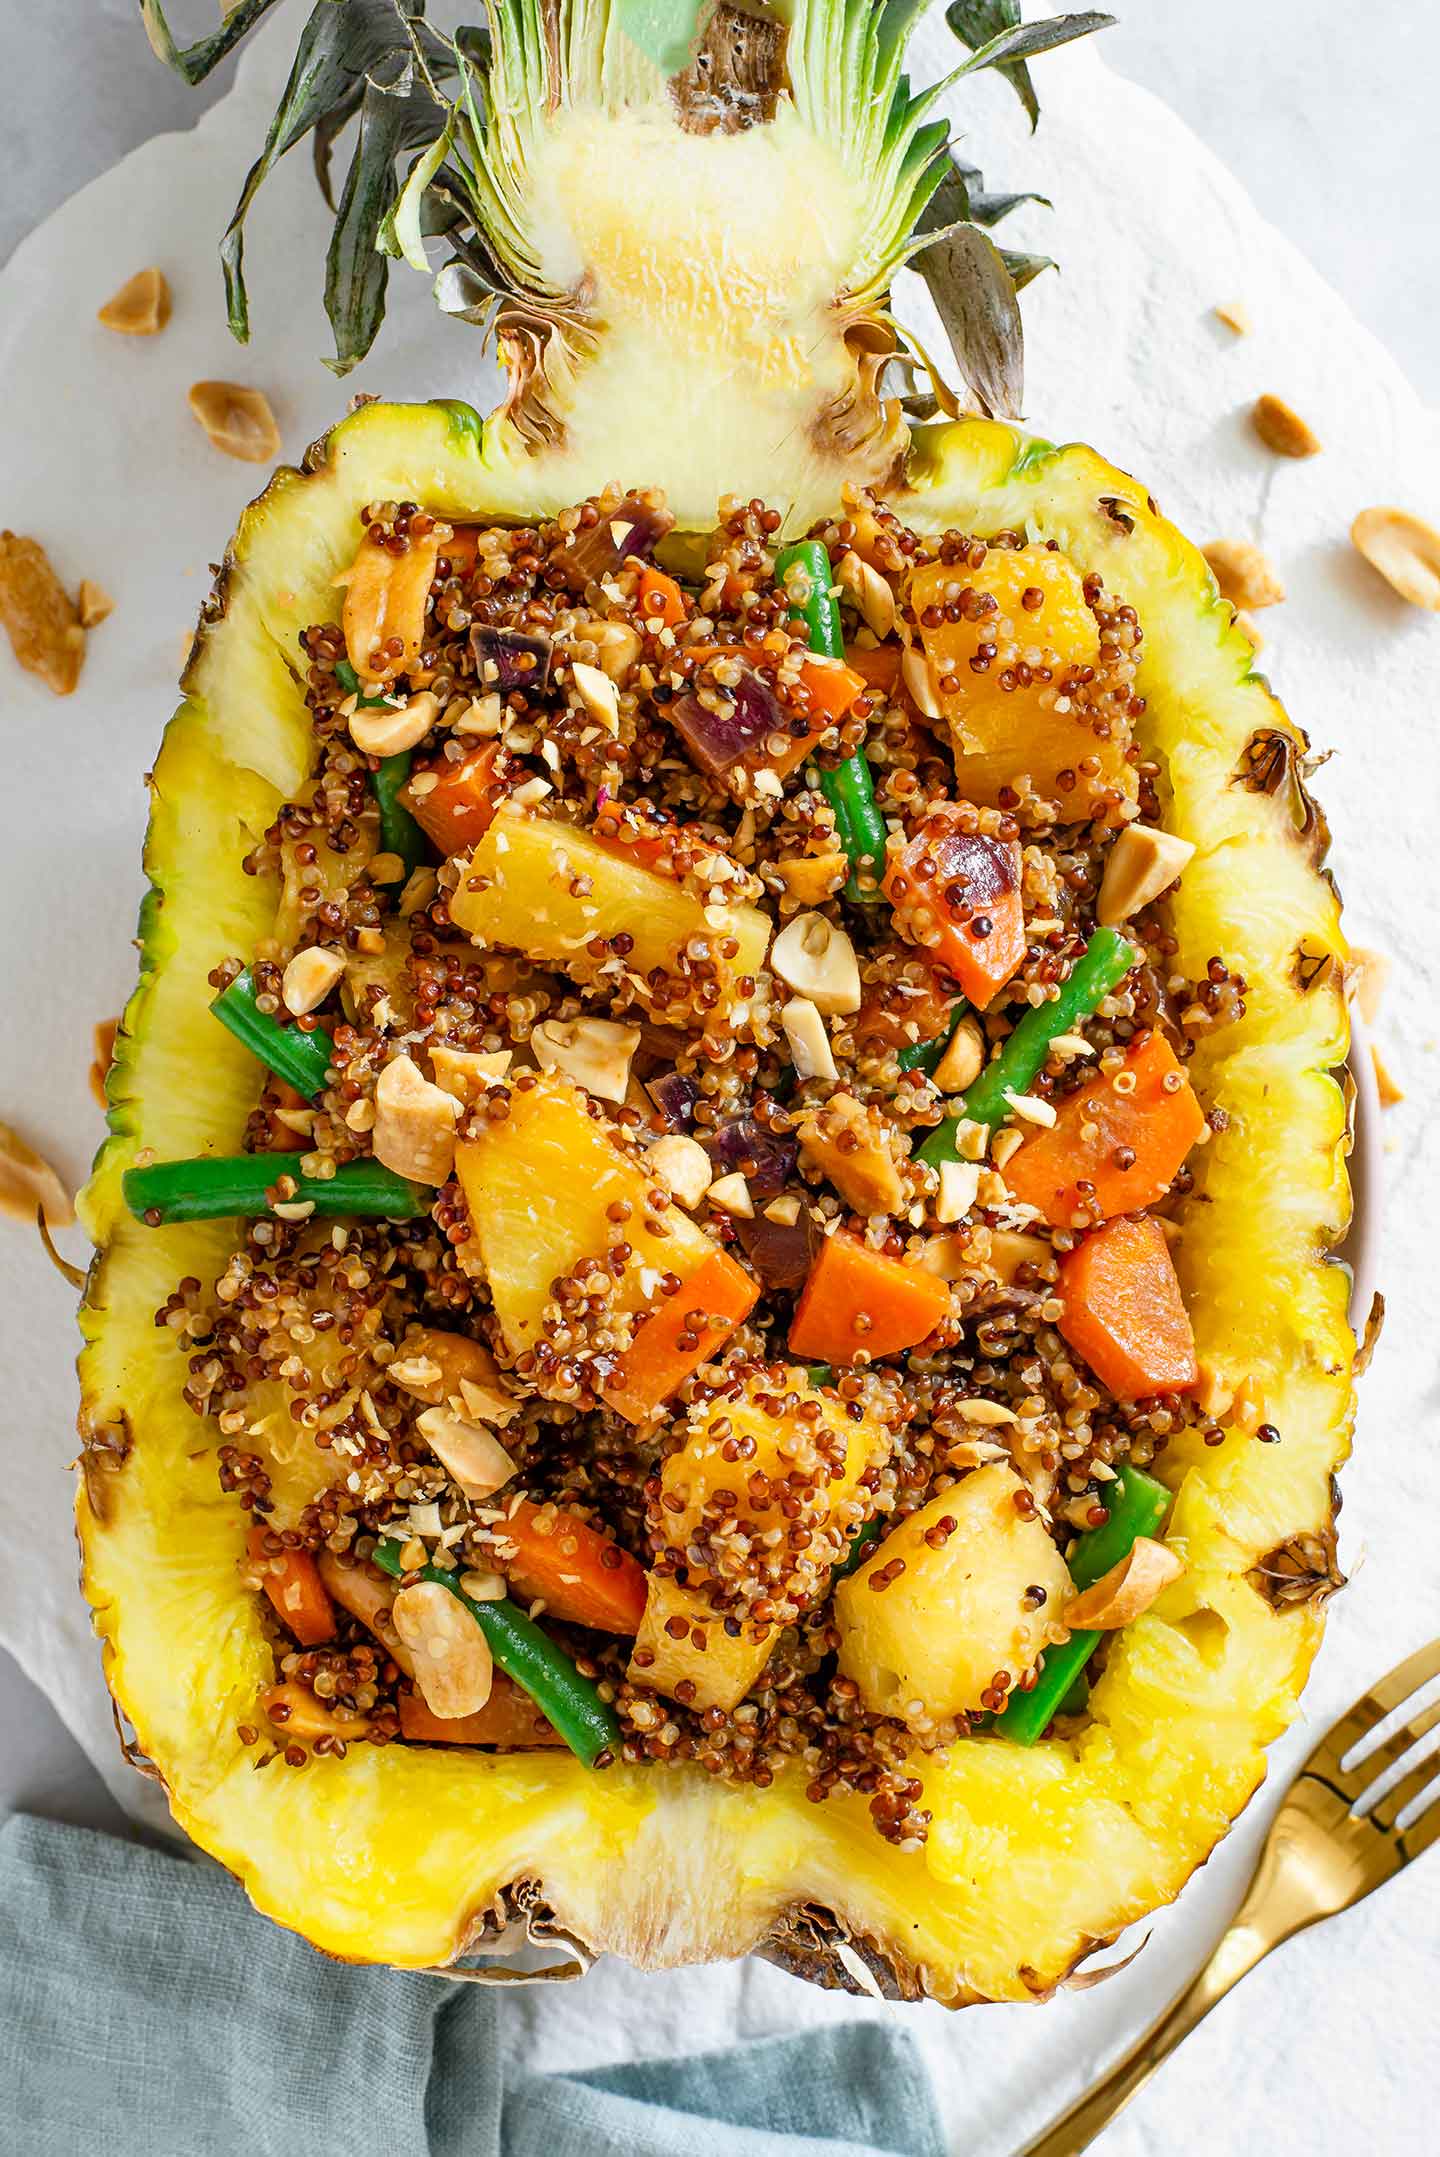 Top down view of a halved pineapple filled with quinoa, green beans, carrots, and pineapple chunks.